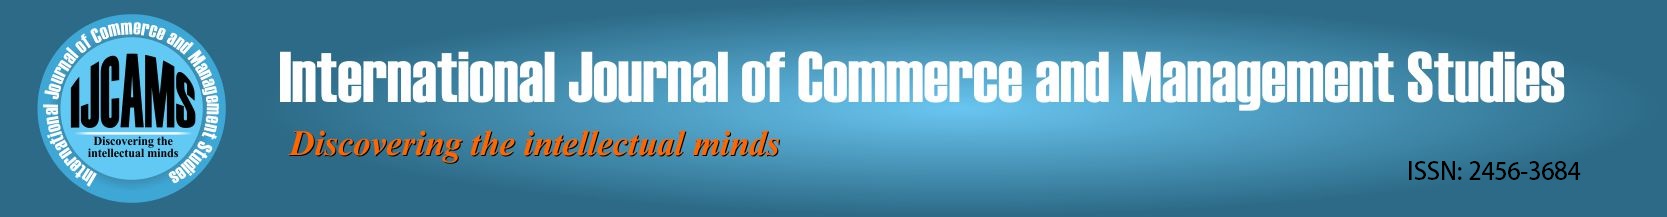 International journal of Commerce and Management Studies